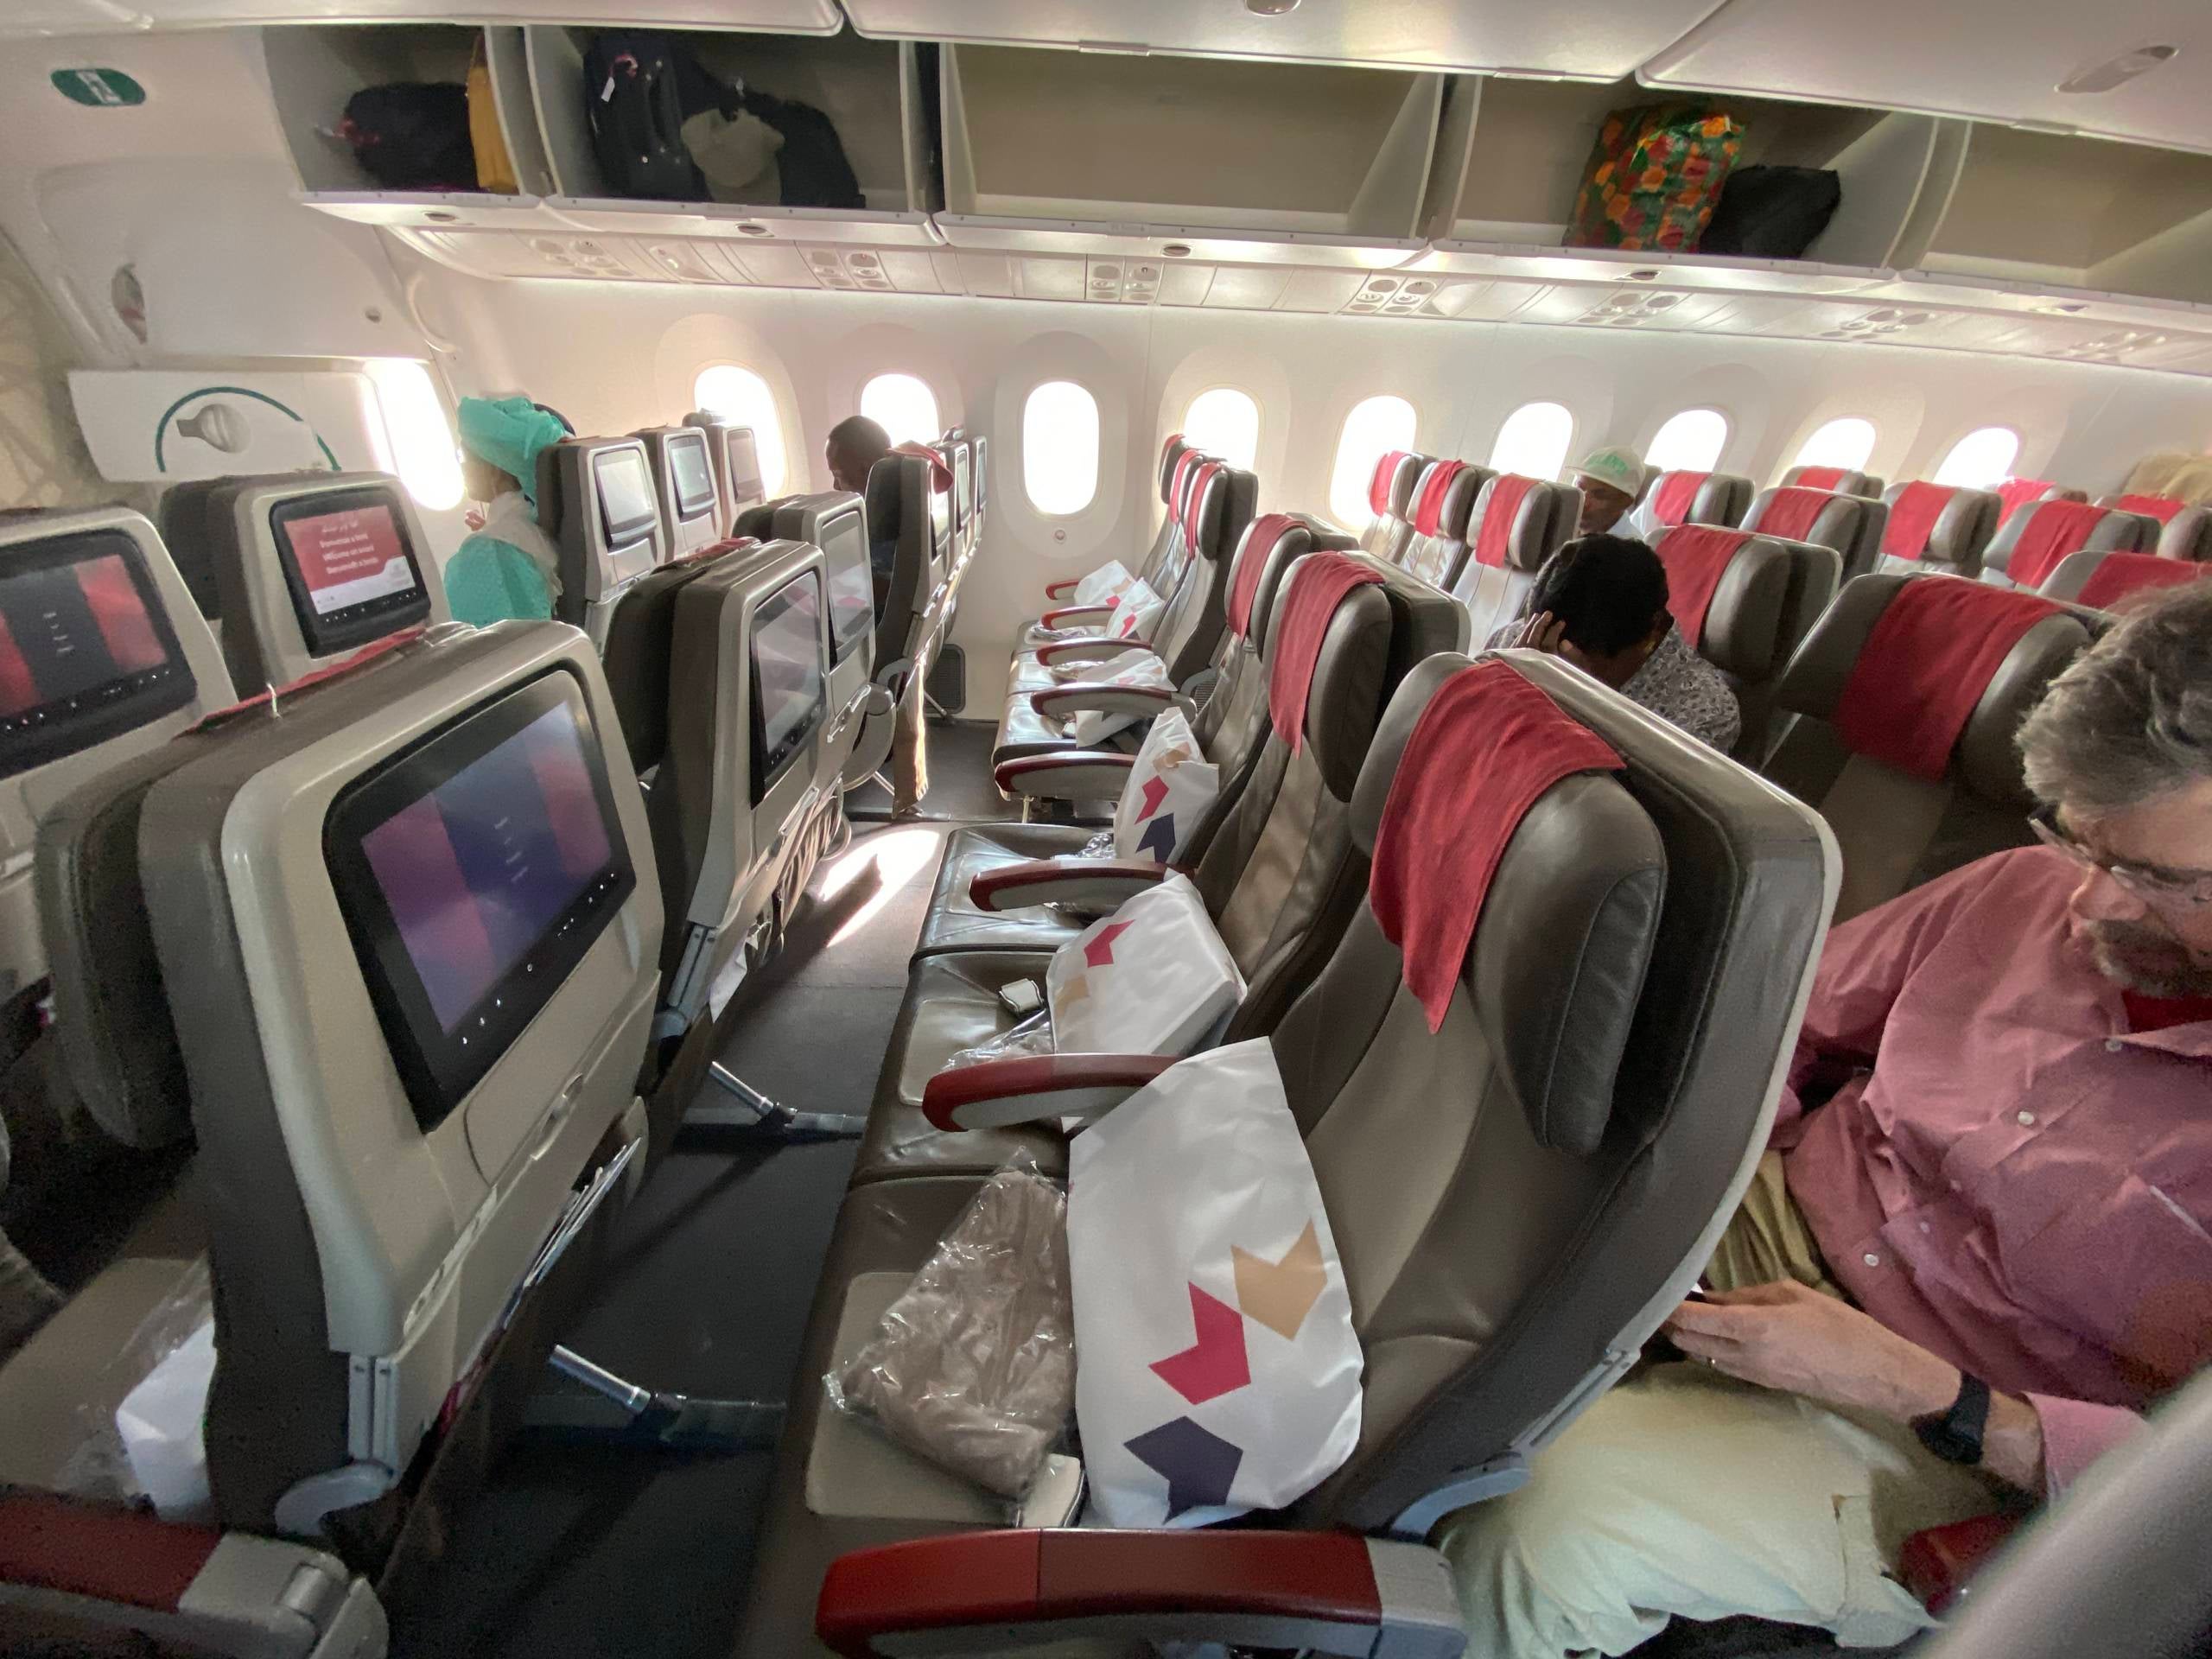 review: Royal Air Maroc economy on the 787-8 to Washington - The Points